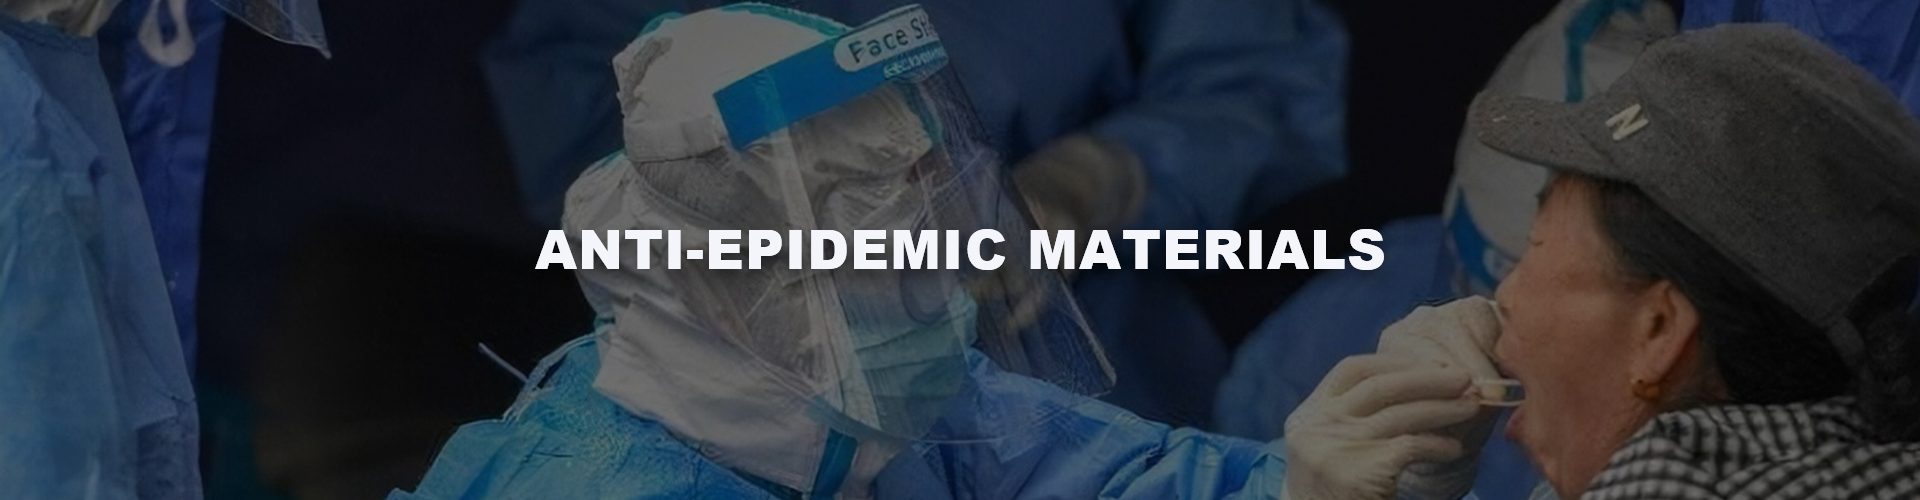 Epidemic prevention materials / PPE protective products